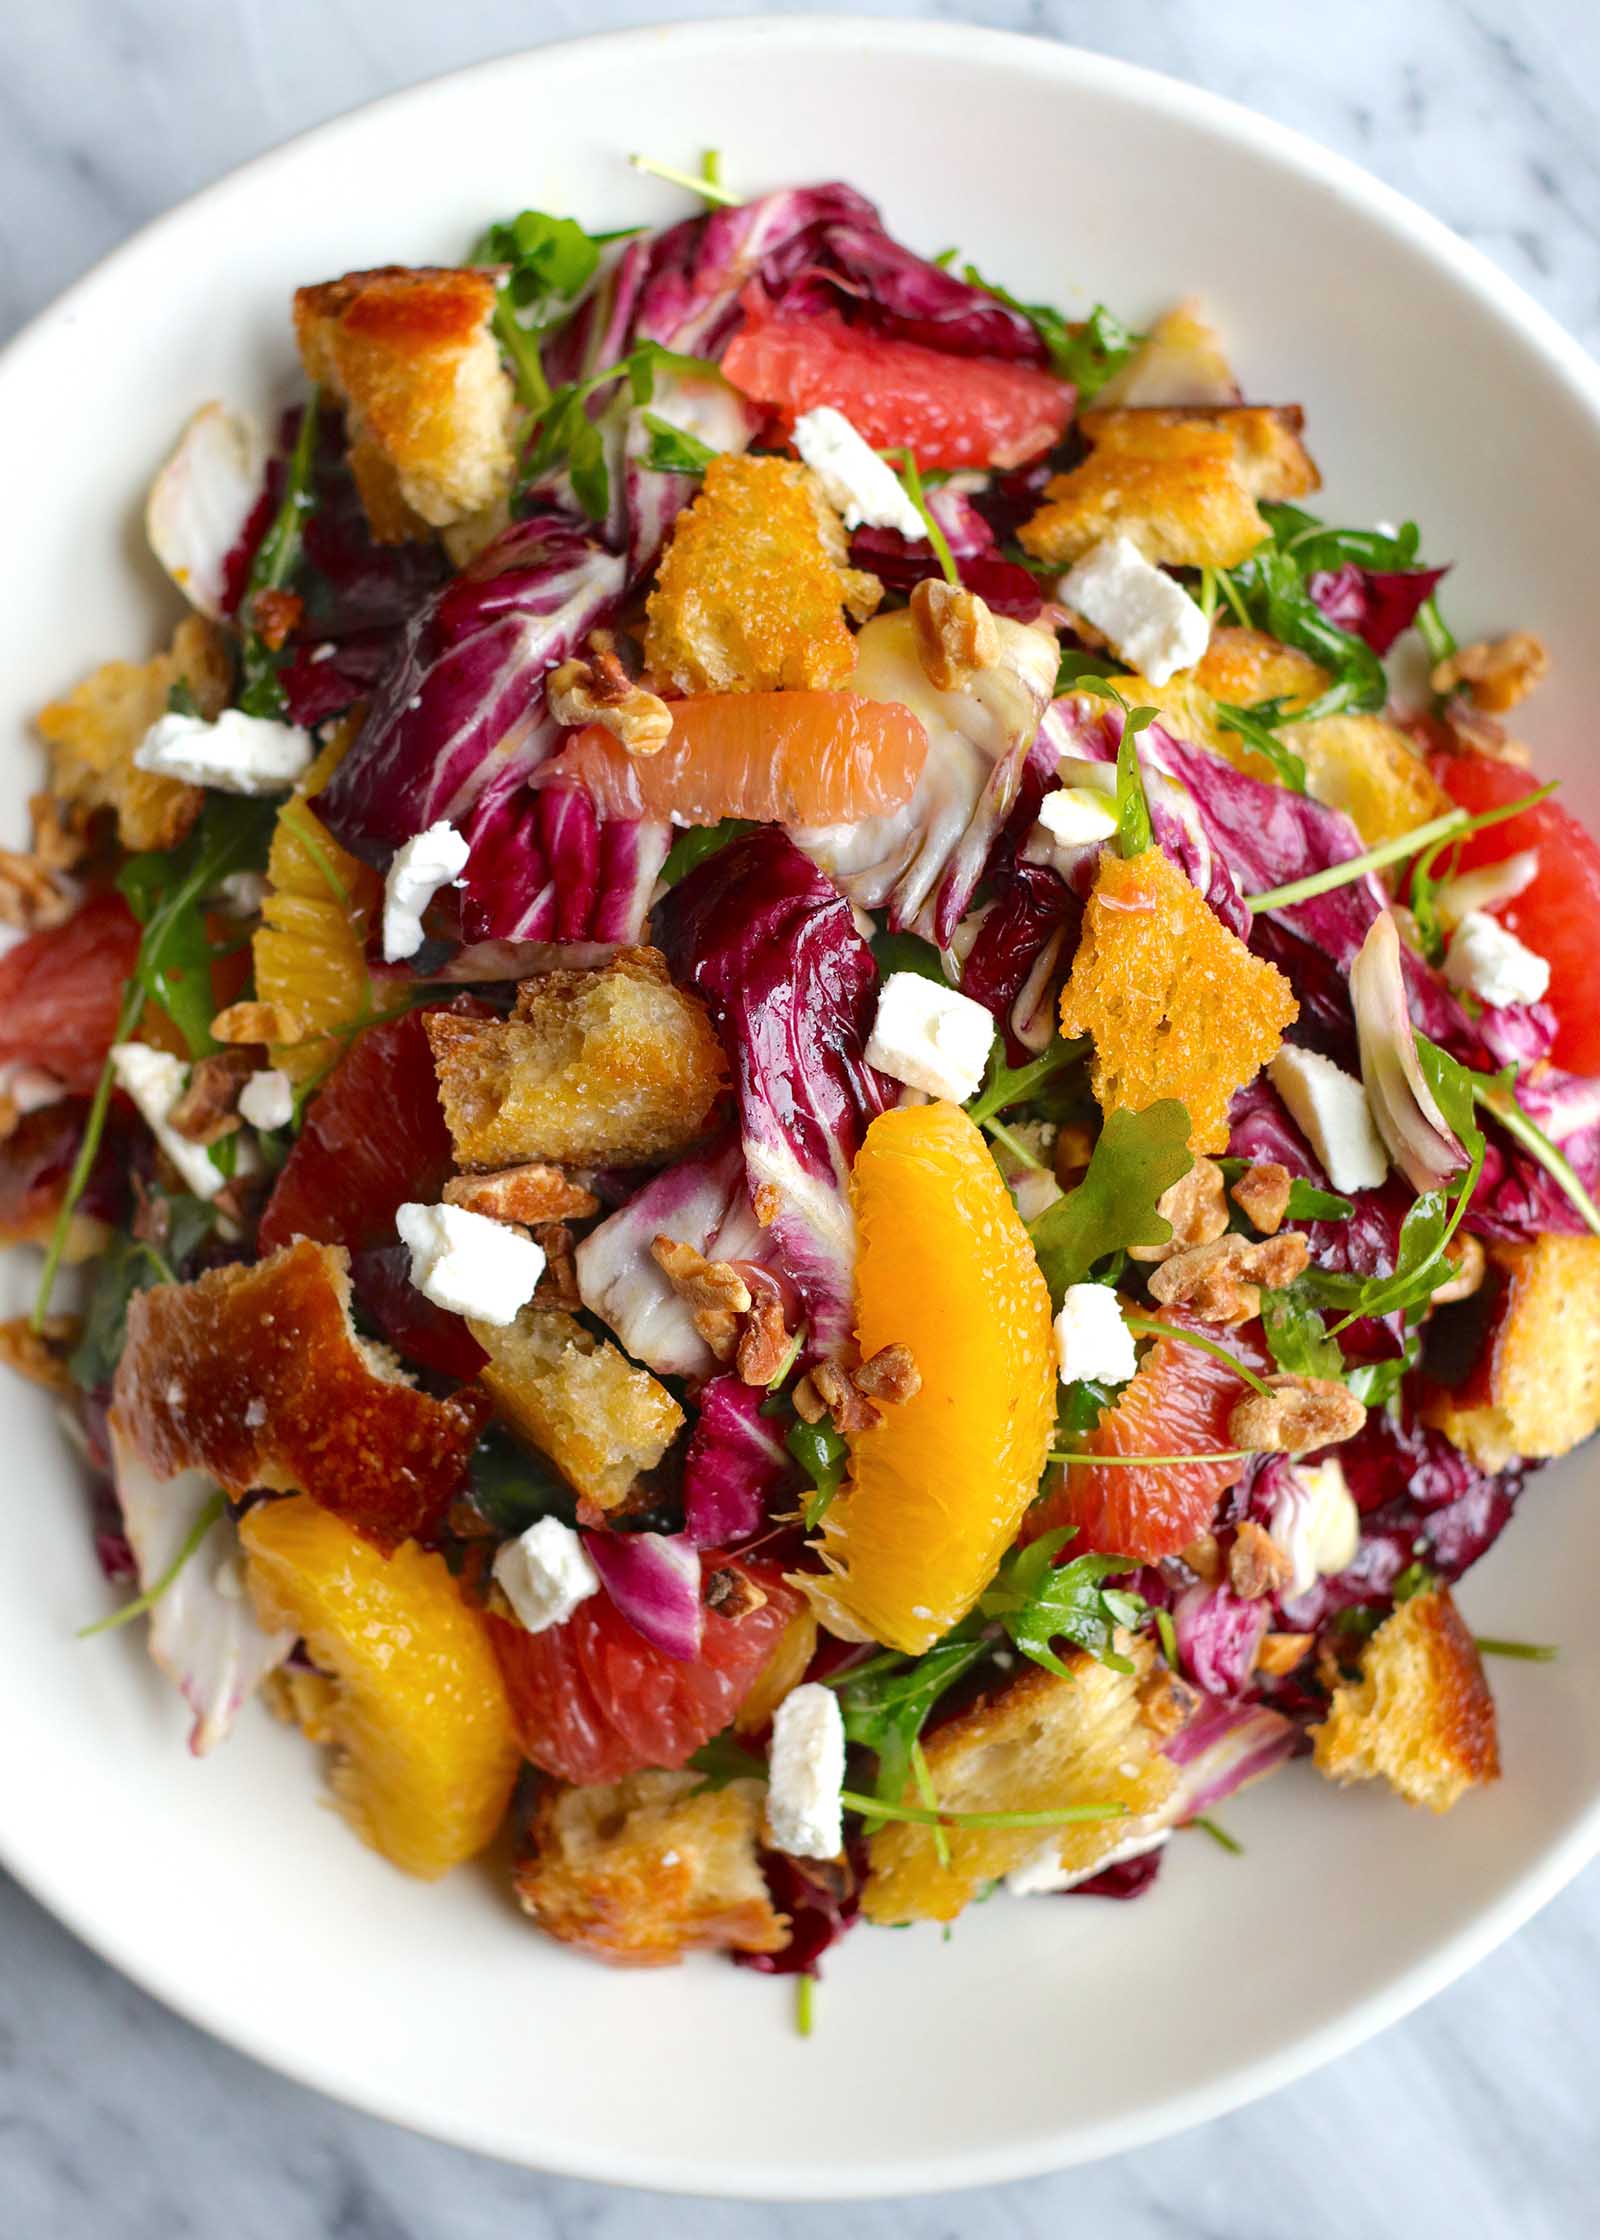 Citrus Salad on a white plate. Supremed orange and grapefruit, radicchio, croutons and feta cheese crumbles are visible.